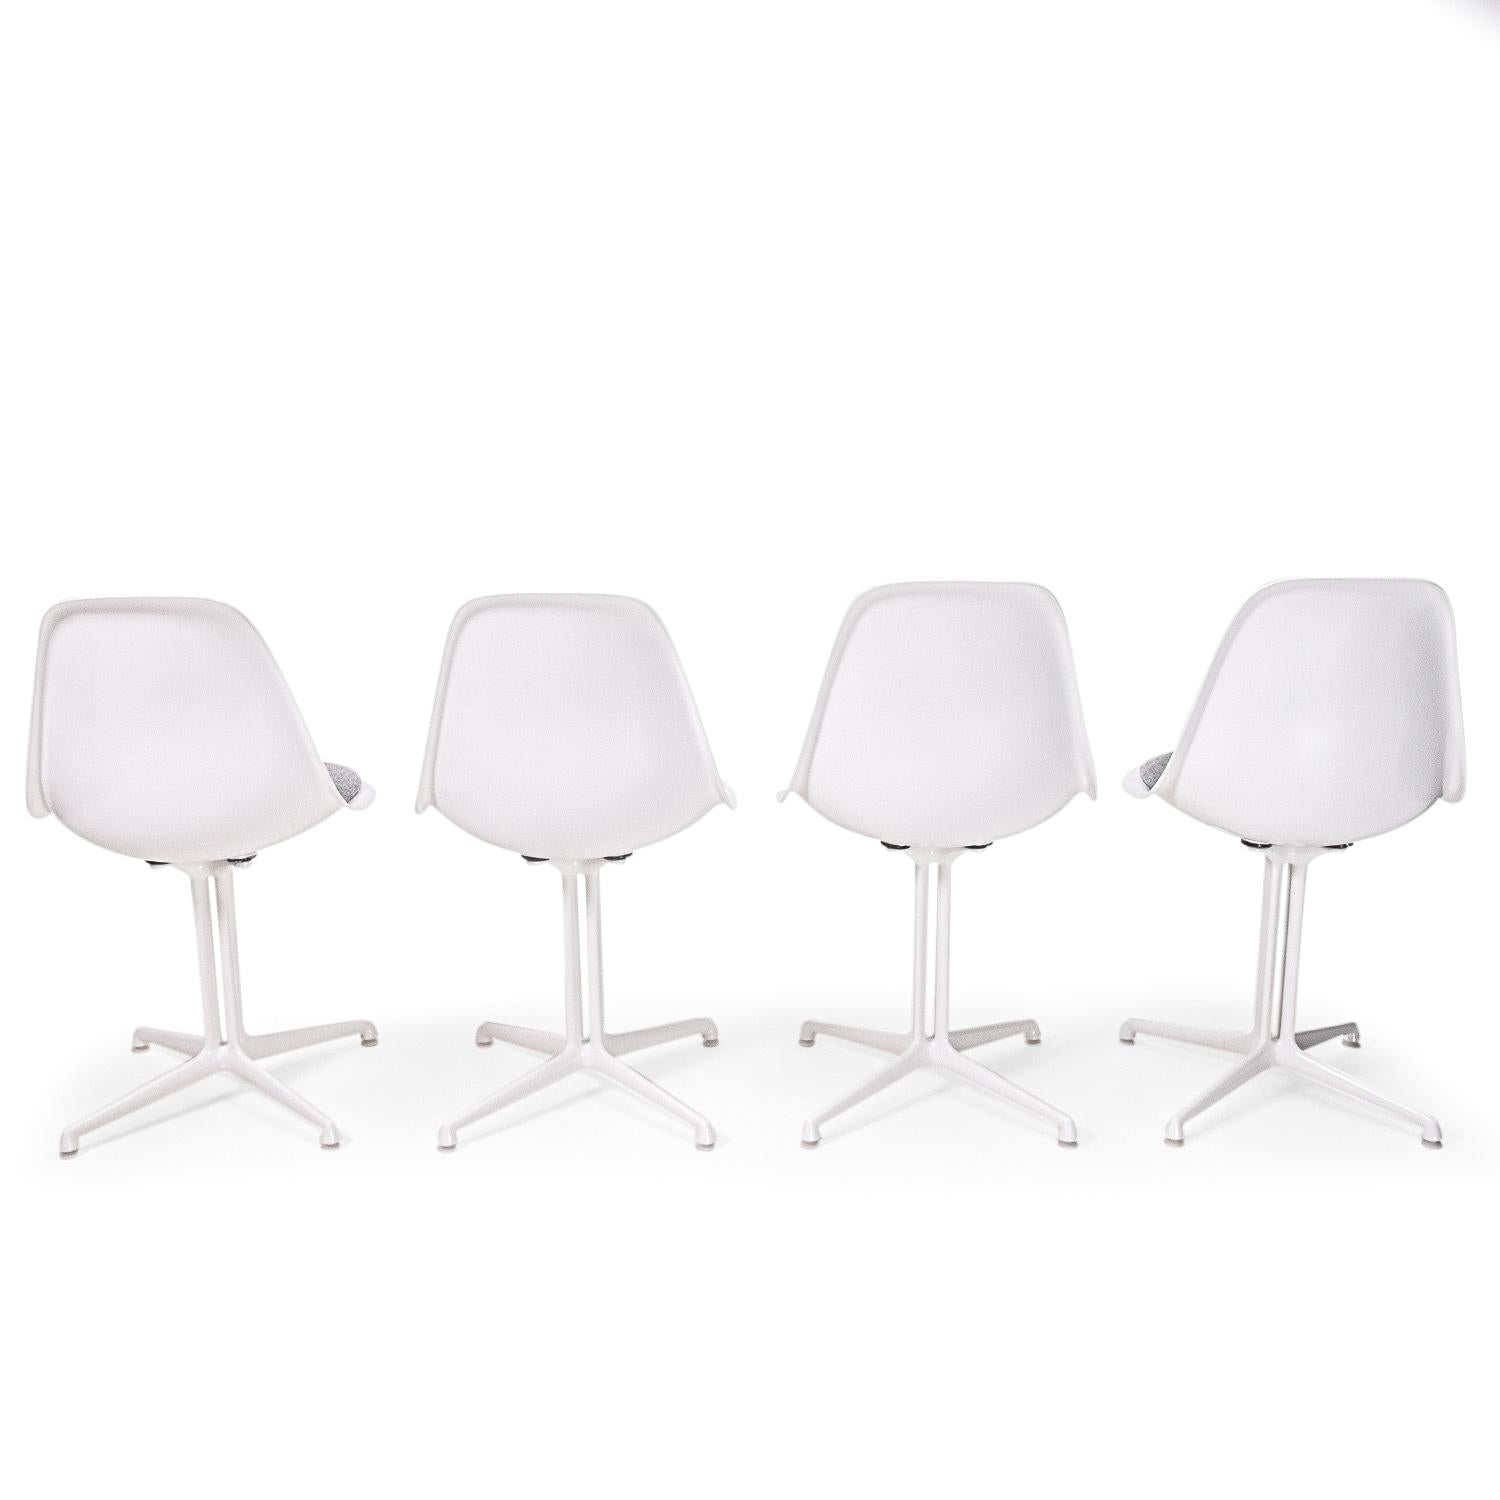 Late 20th Century Fully Restored Vintage Eames Side Chairs, Set of 4, La Fonda Base